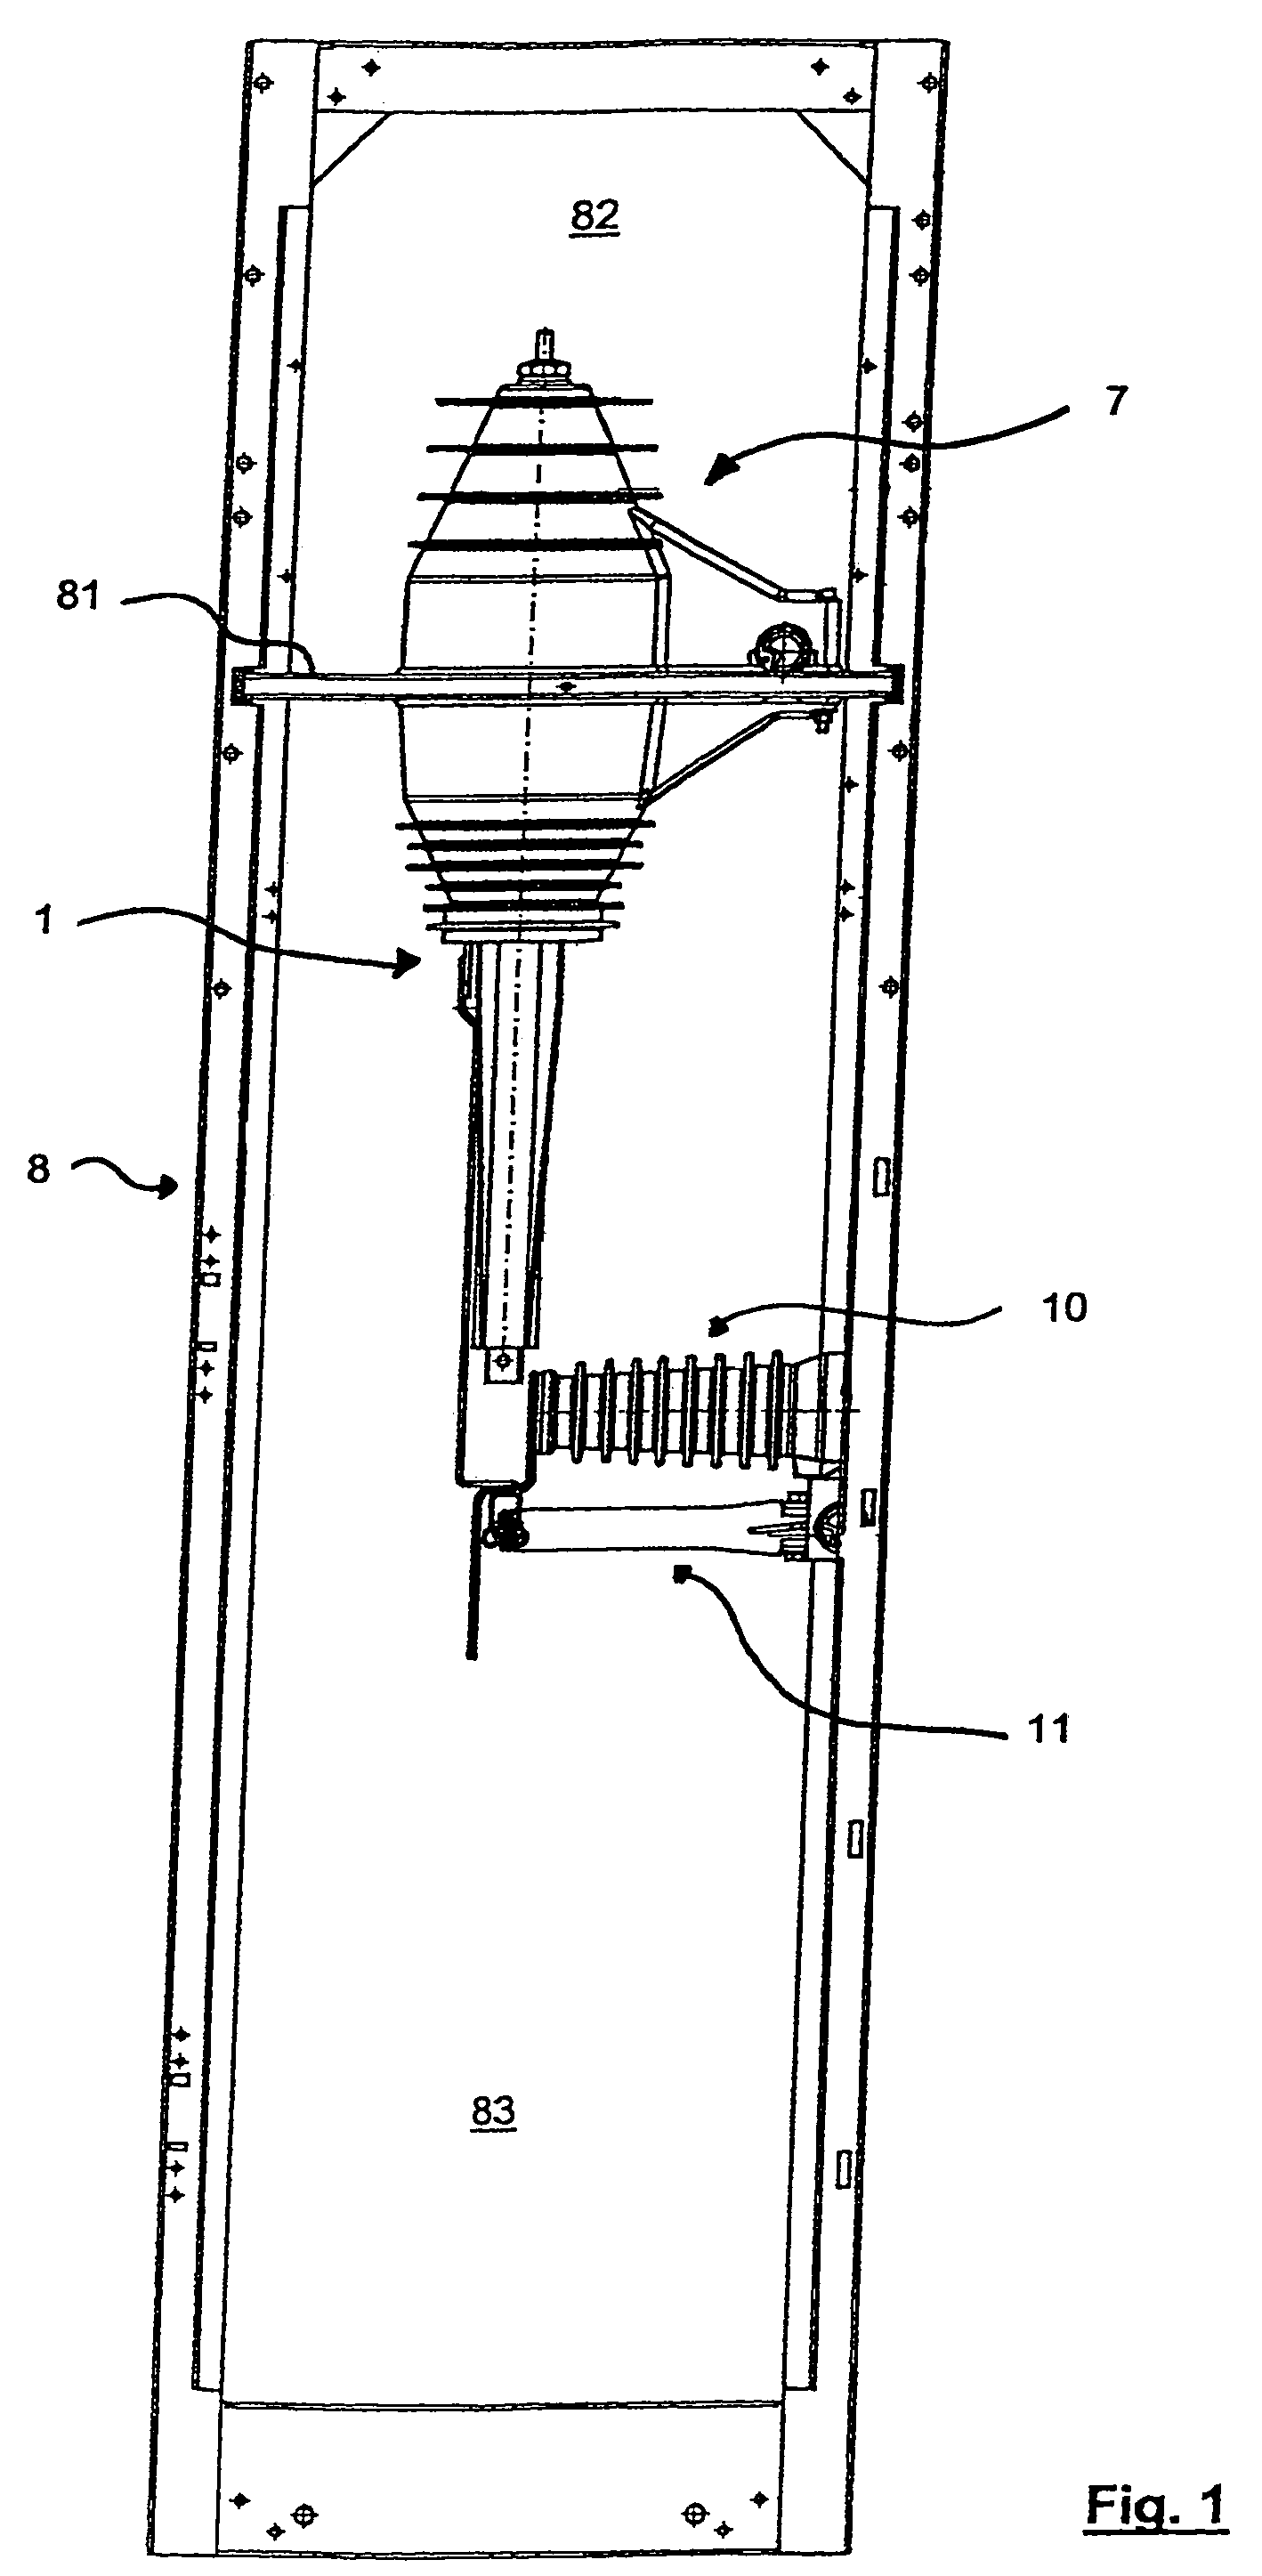 Switch and disconnector apparatus for electric substations